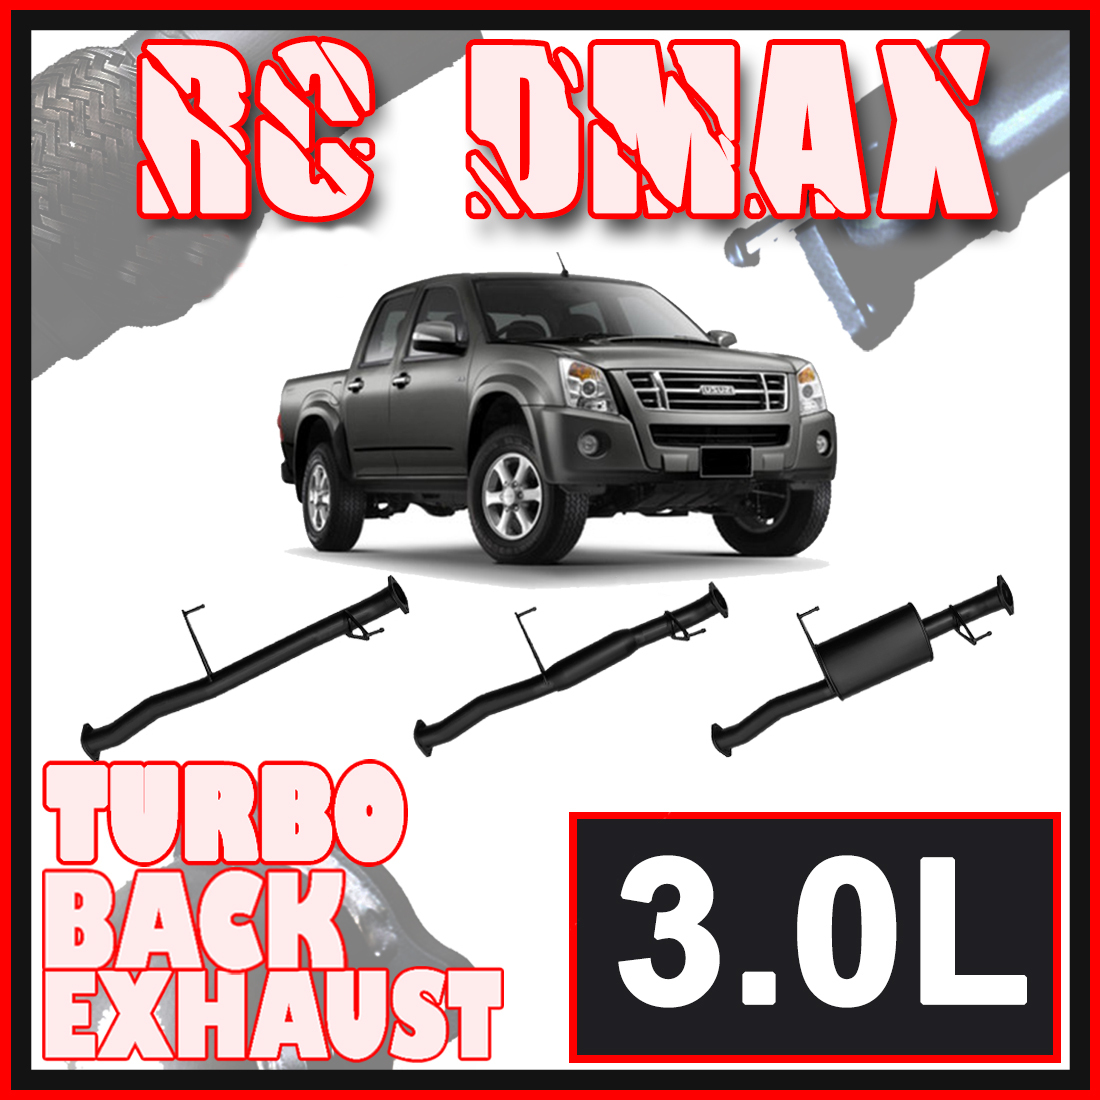 Isuzu RC D-Max Exhaust 3L 2007 to 2012 3" Turbo Back Systems image